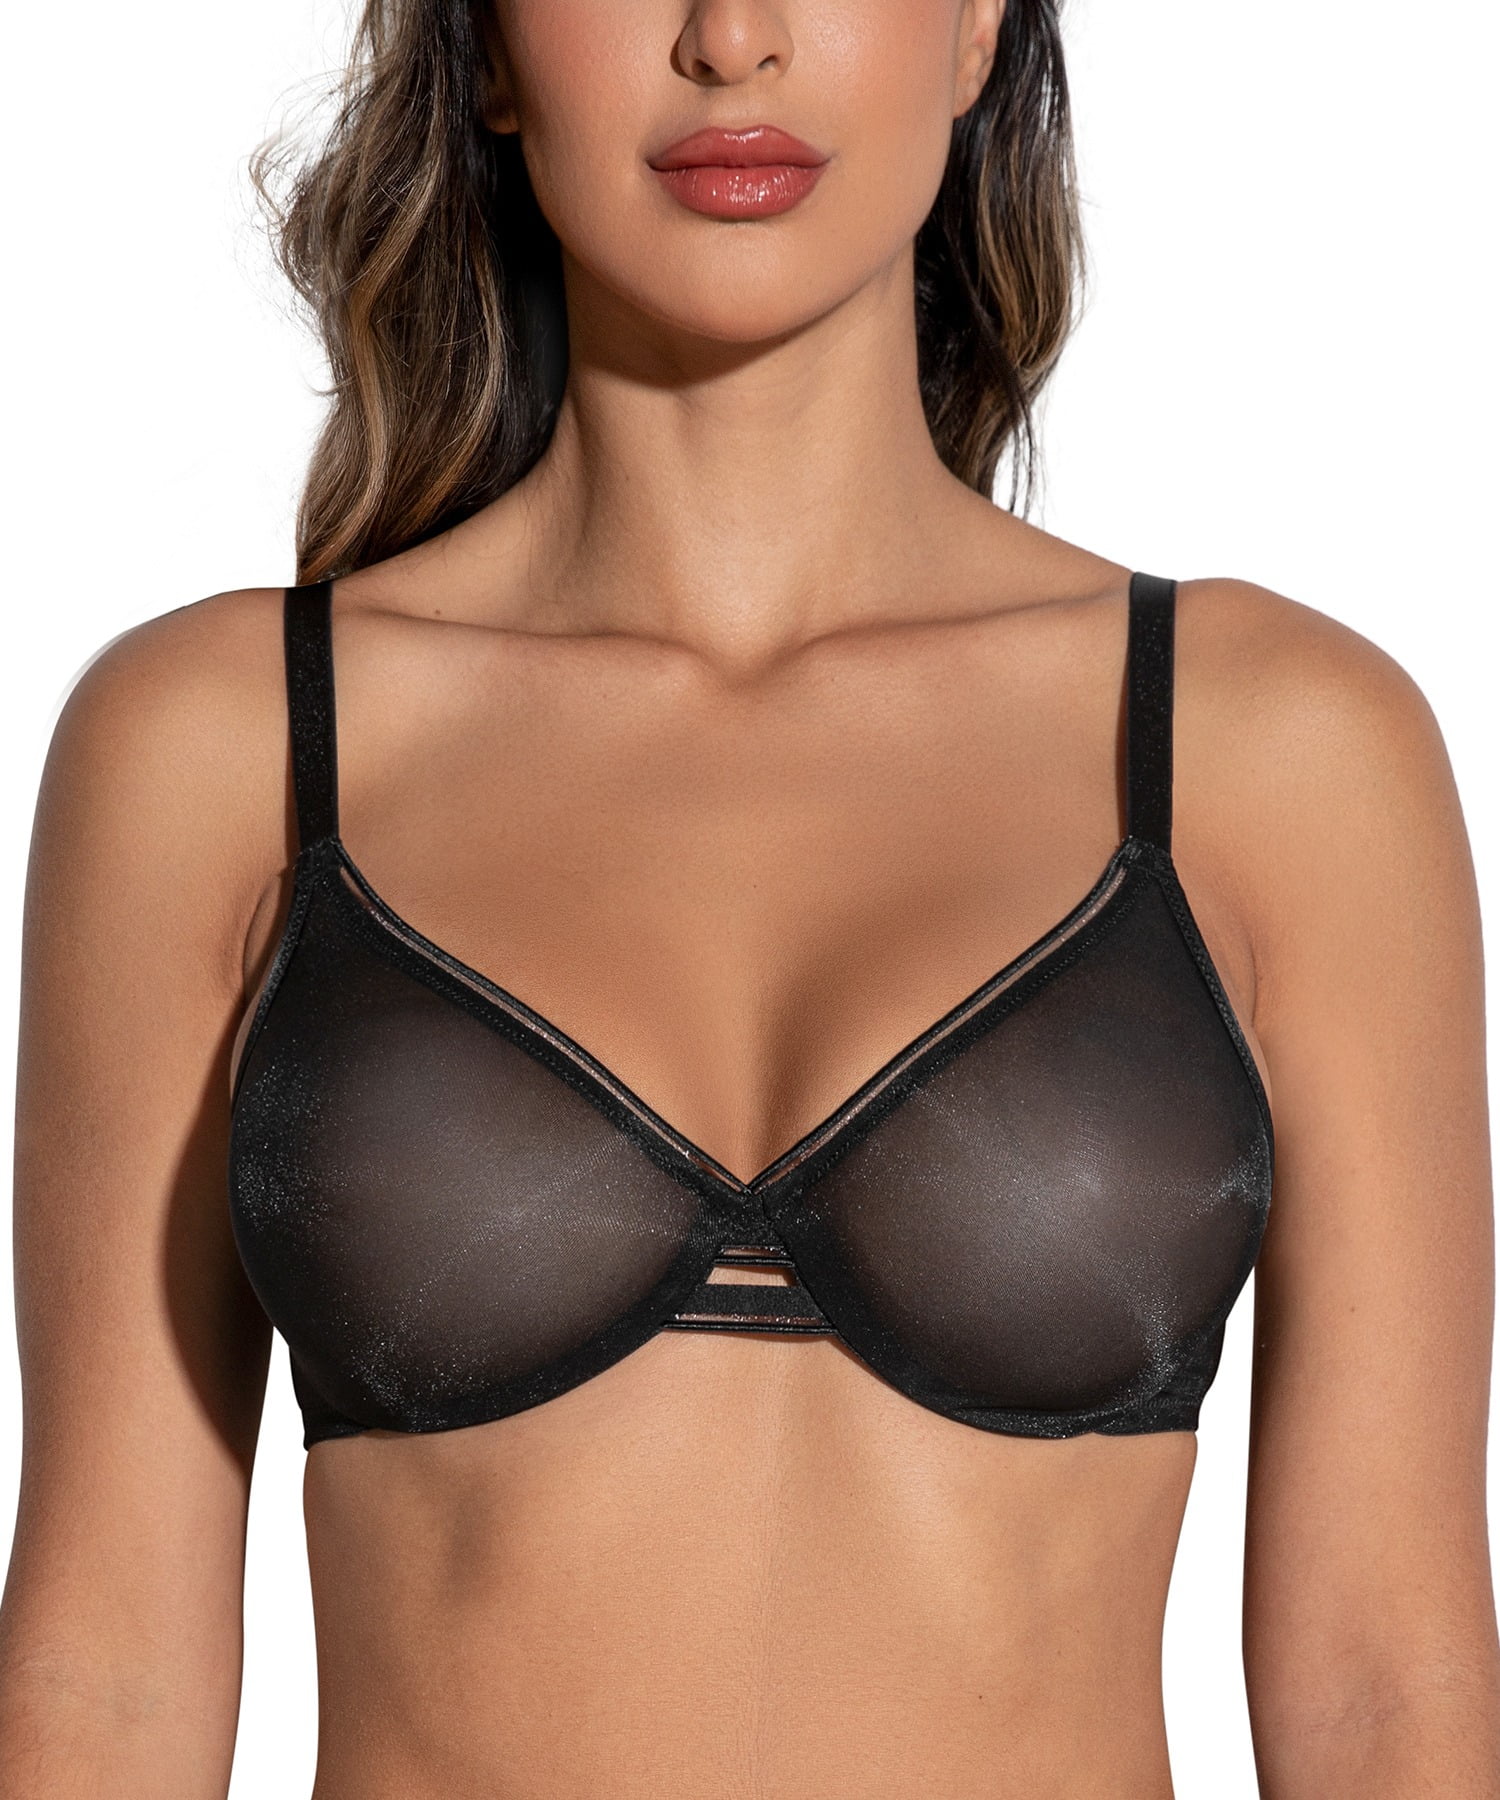 Reveal Womens Low-Key Less Is More Unlined Comfort Bra Style-B30306 